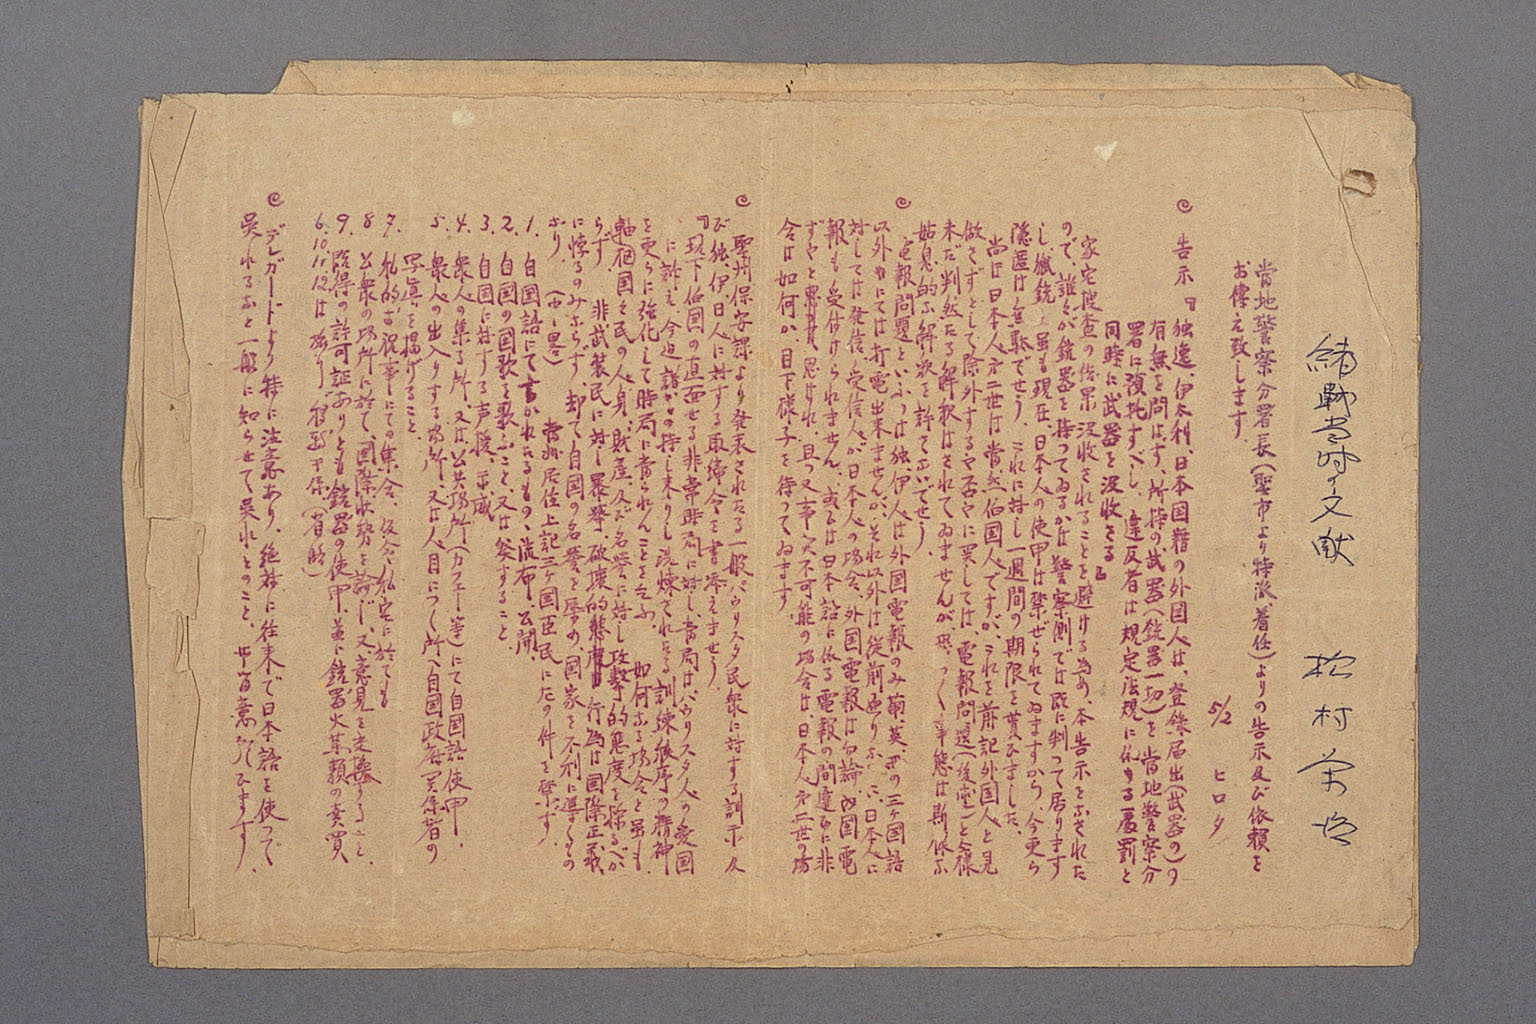 Image “Documents from the local police department and the Japanese Consulate in São Paulo during the first stage of the war”